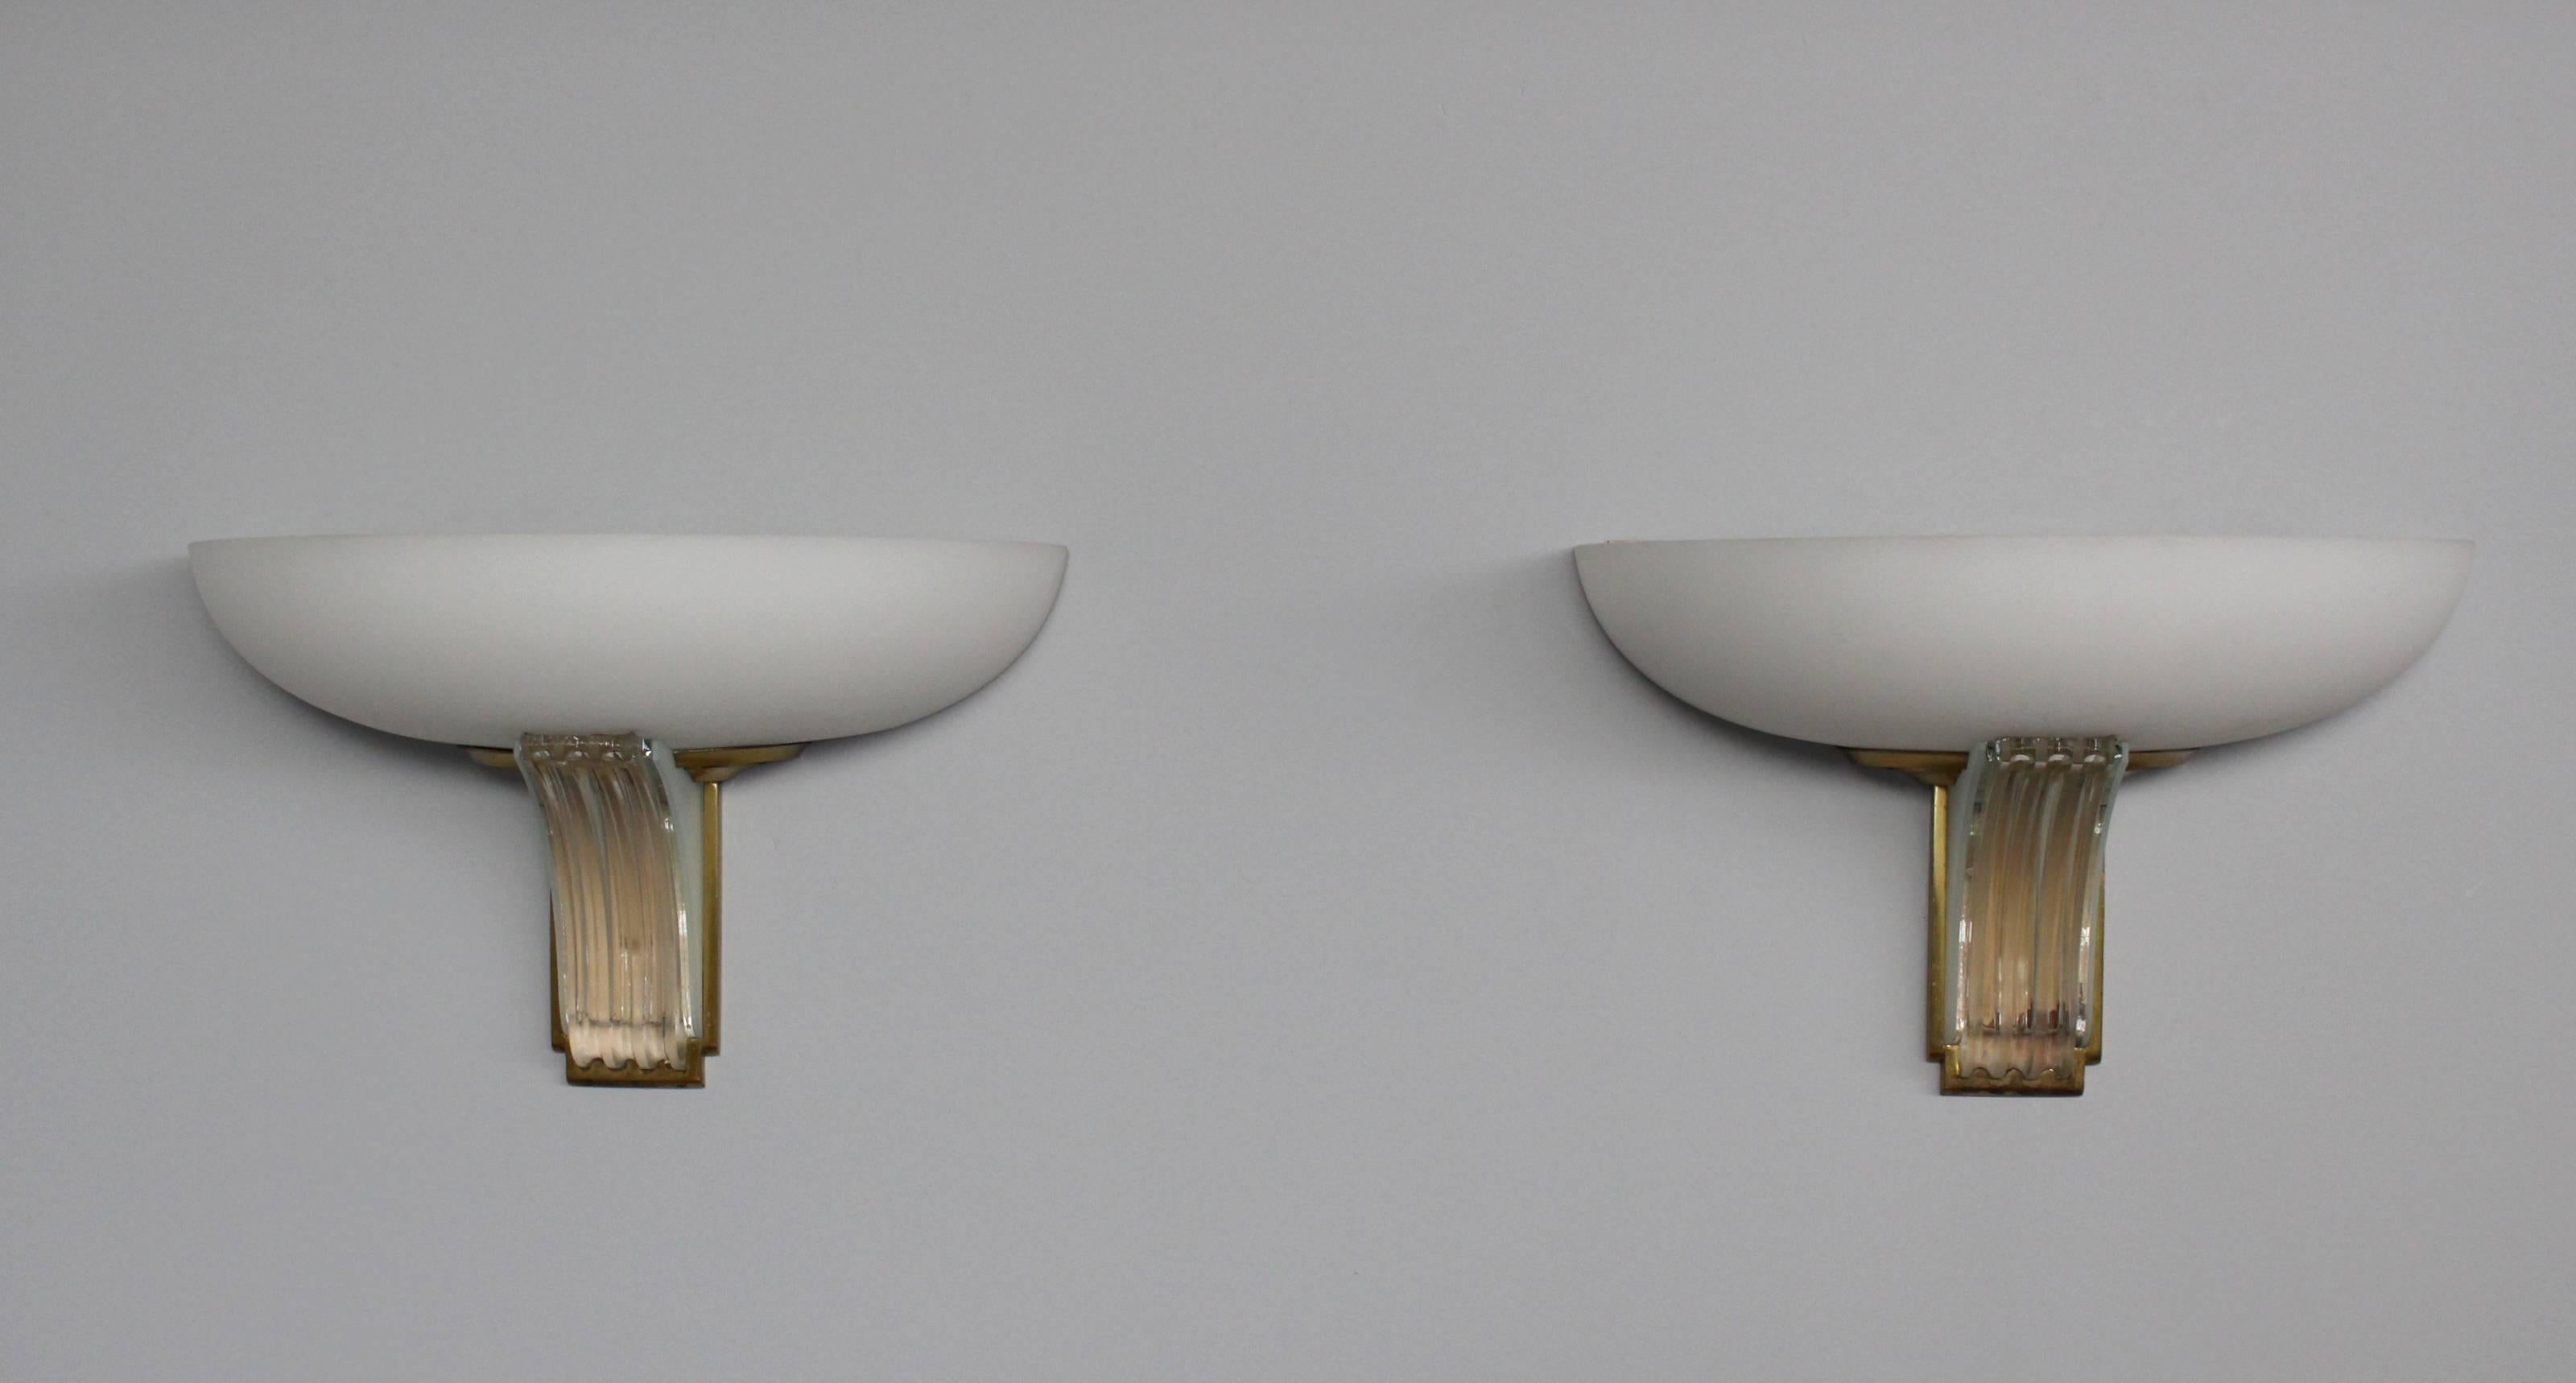 A pair of fine French Art Deco clear and frosted glass sconces by Jean Perzel with bronze details.Shade is made with white opaline. Signed.